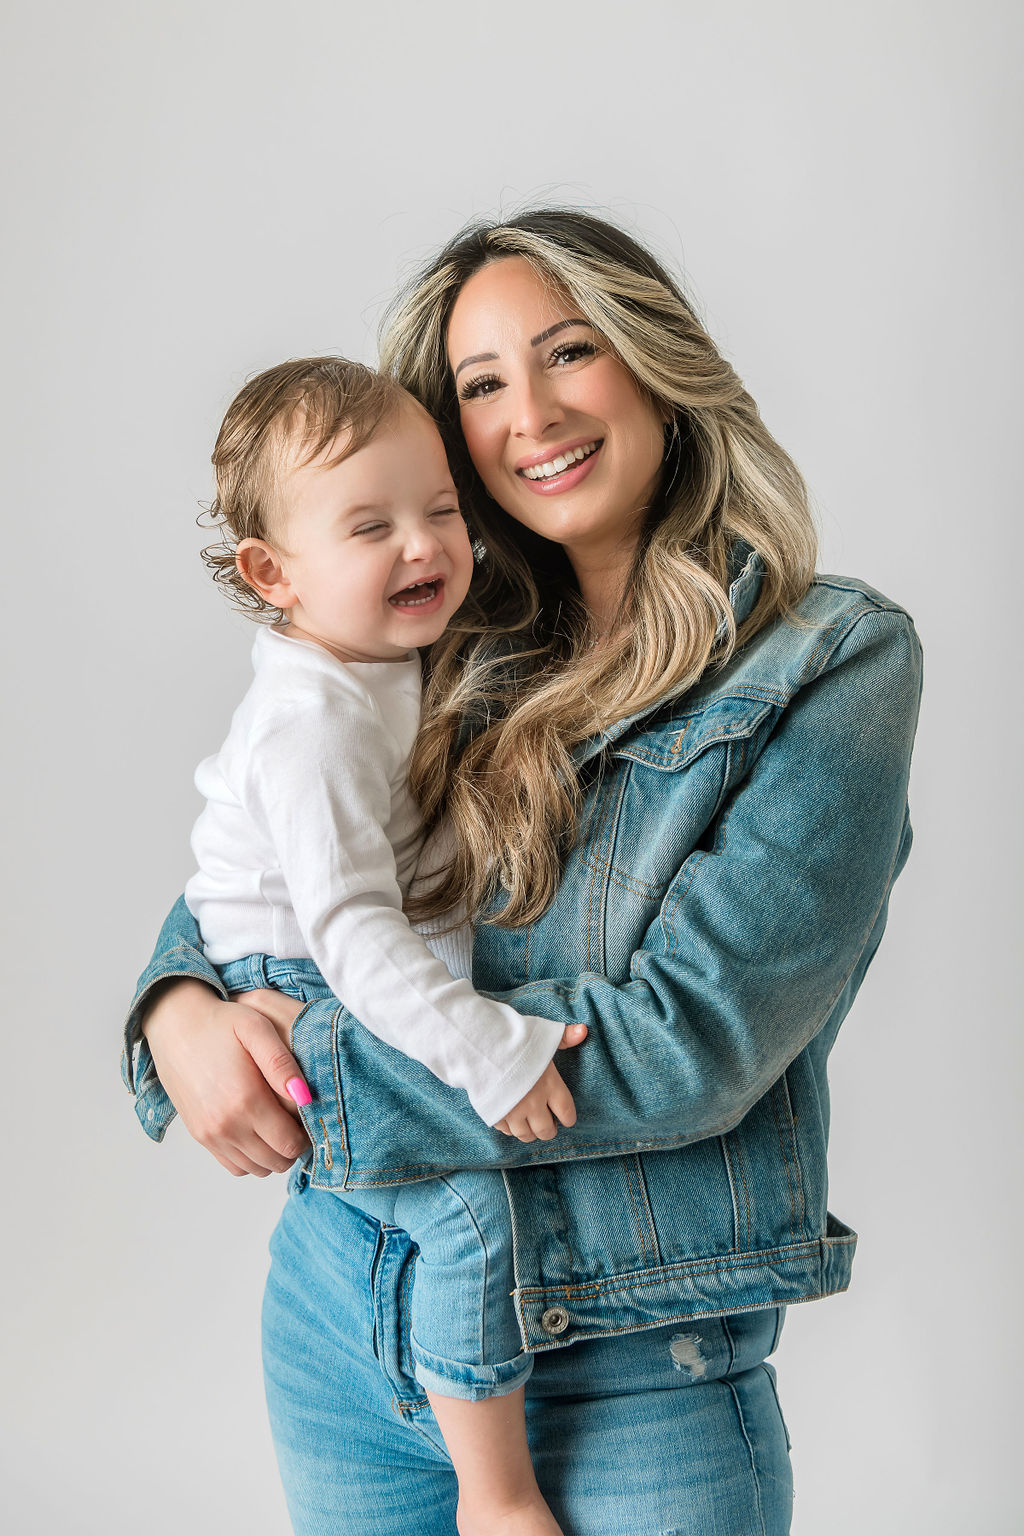 A happy mom smiles with her toddler in her arms while wearing a denim jacket and pants